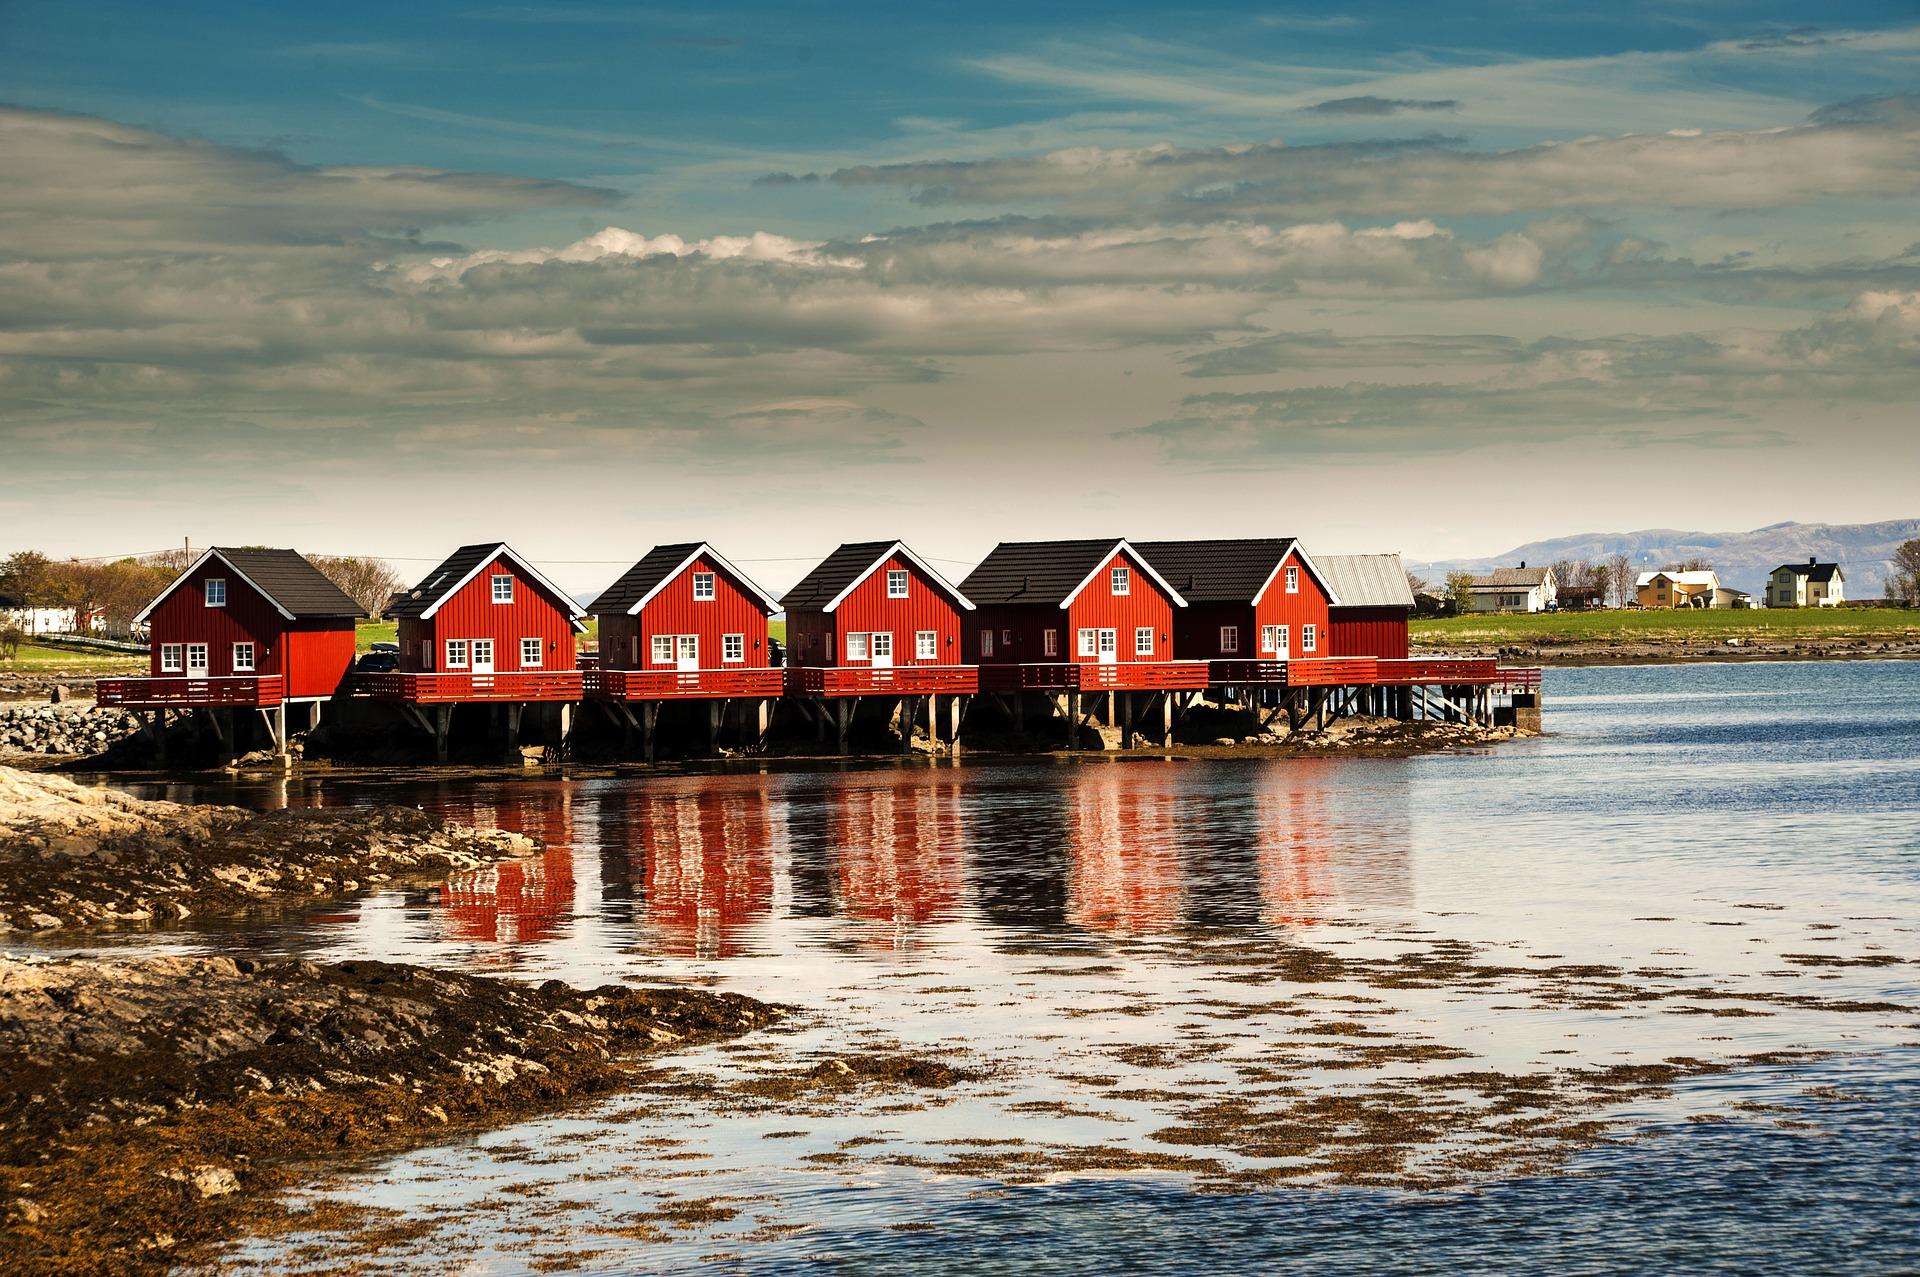 10 Best Denmark, Norway And Sweden Tours & Trips 2021/2022